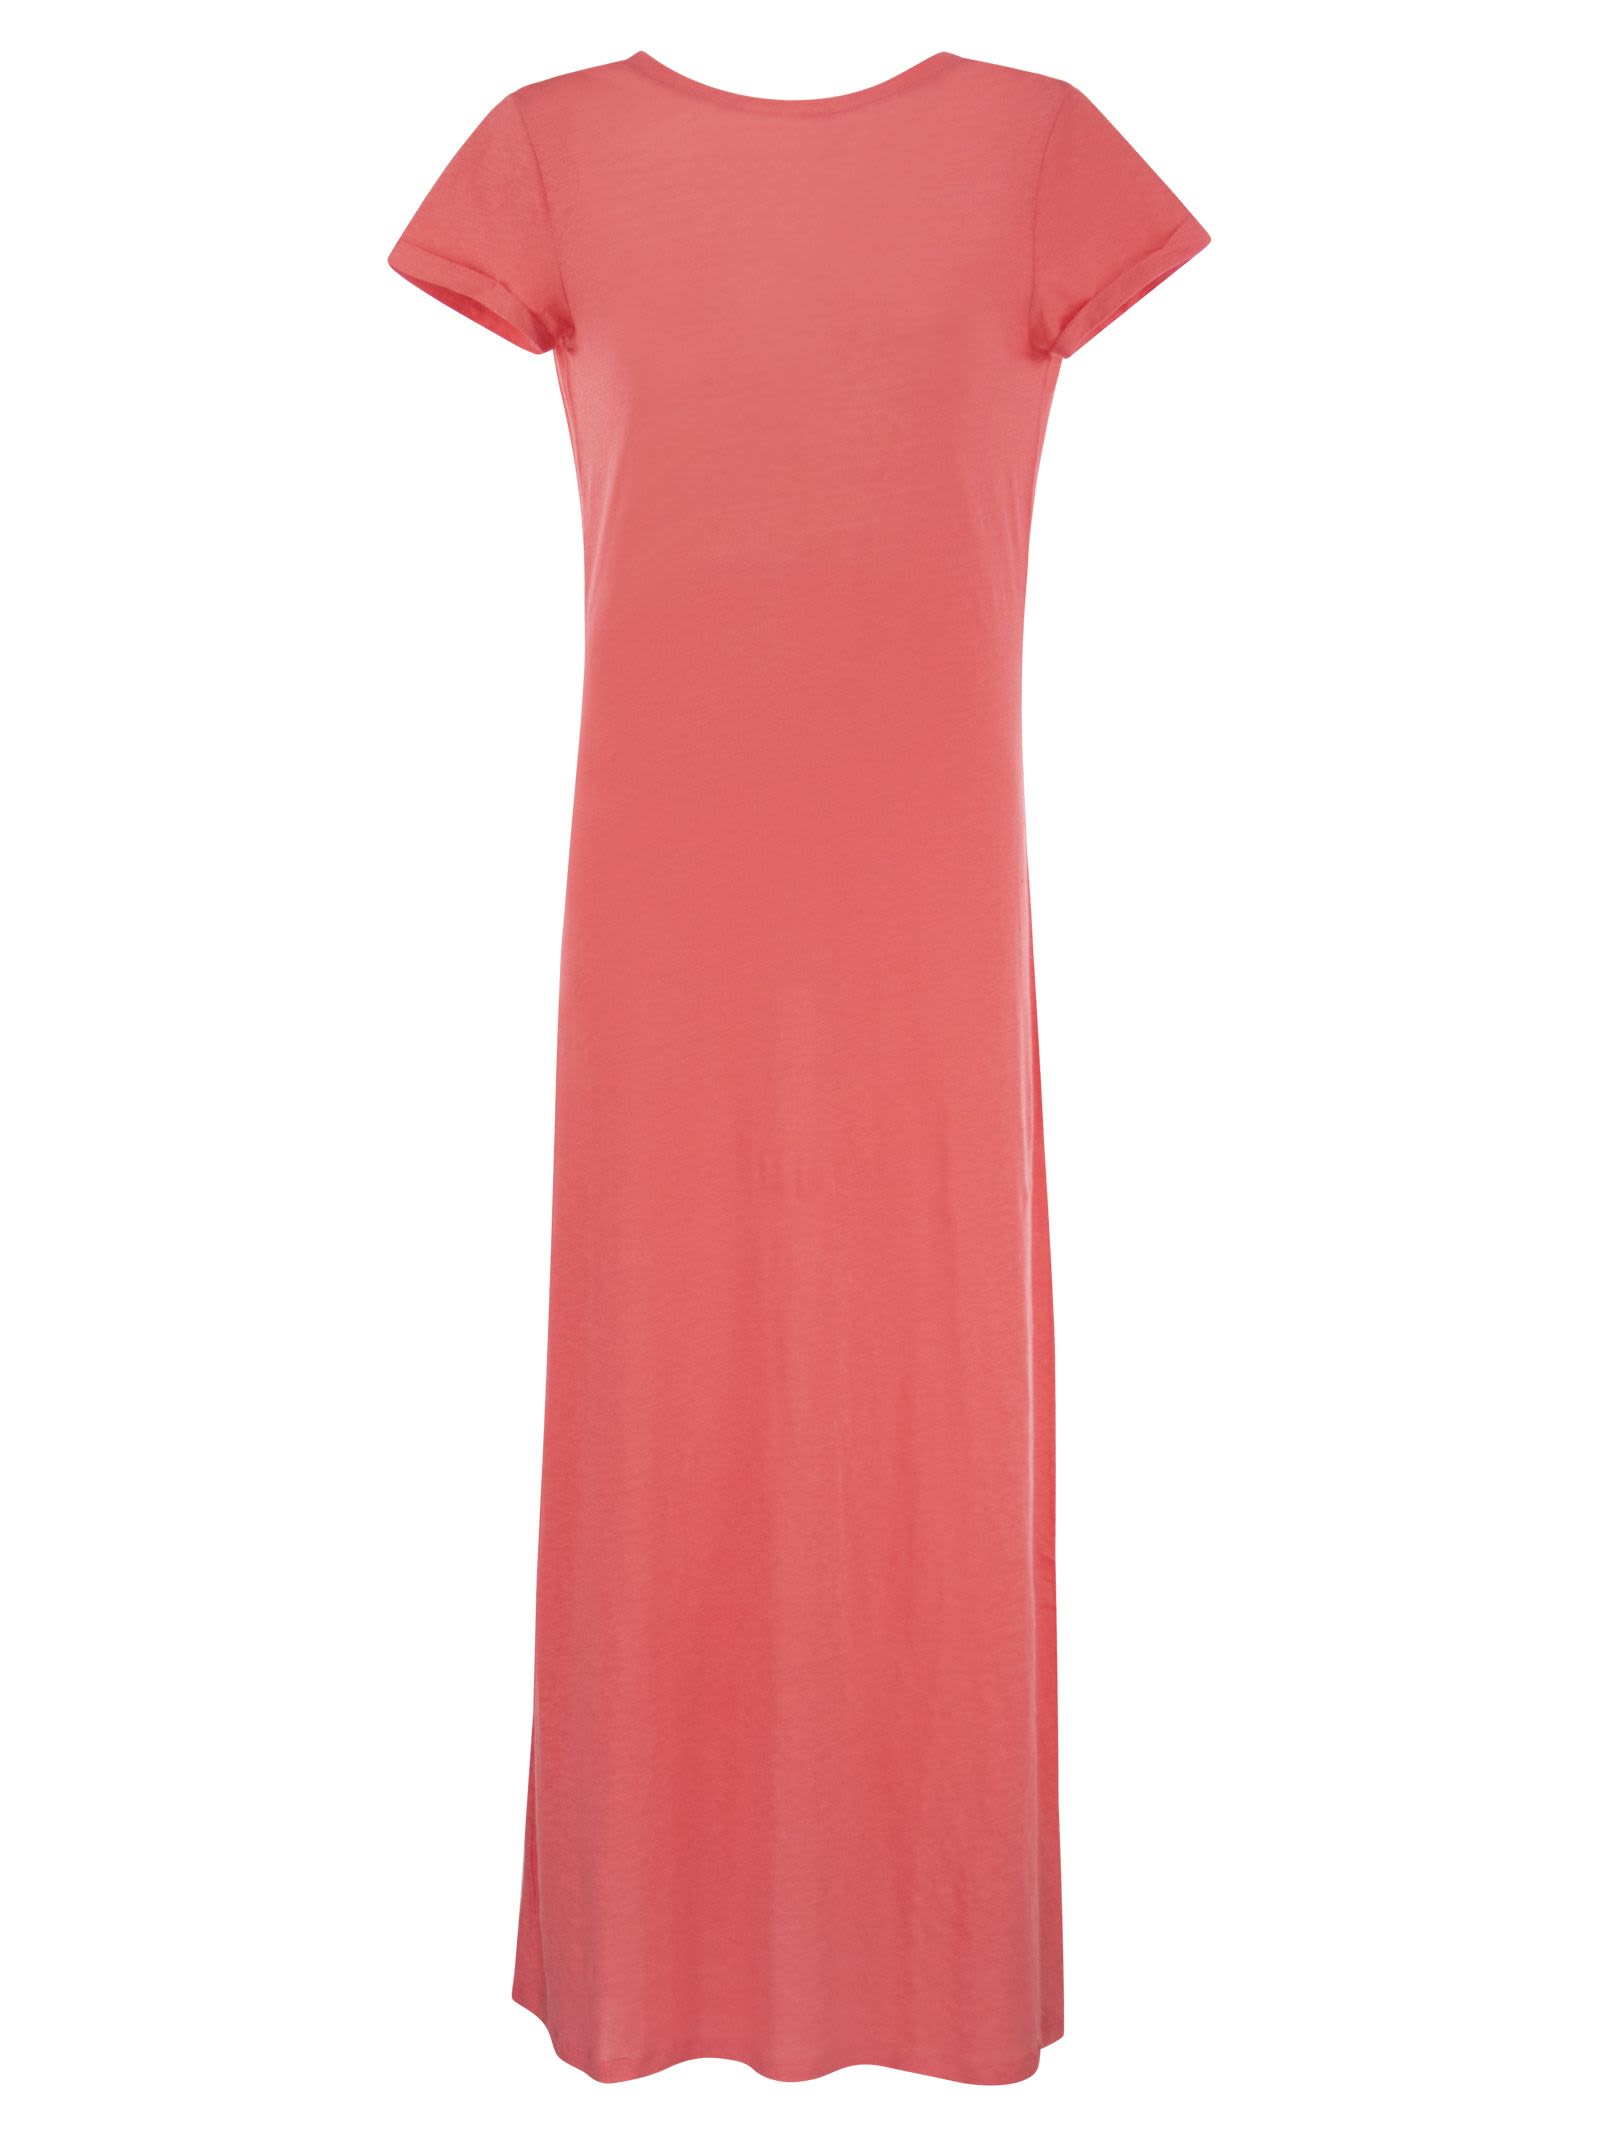 Shop Majestic Dress With Back Neckline In Coral